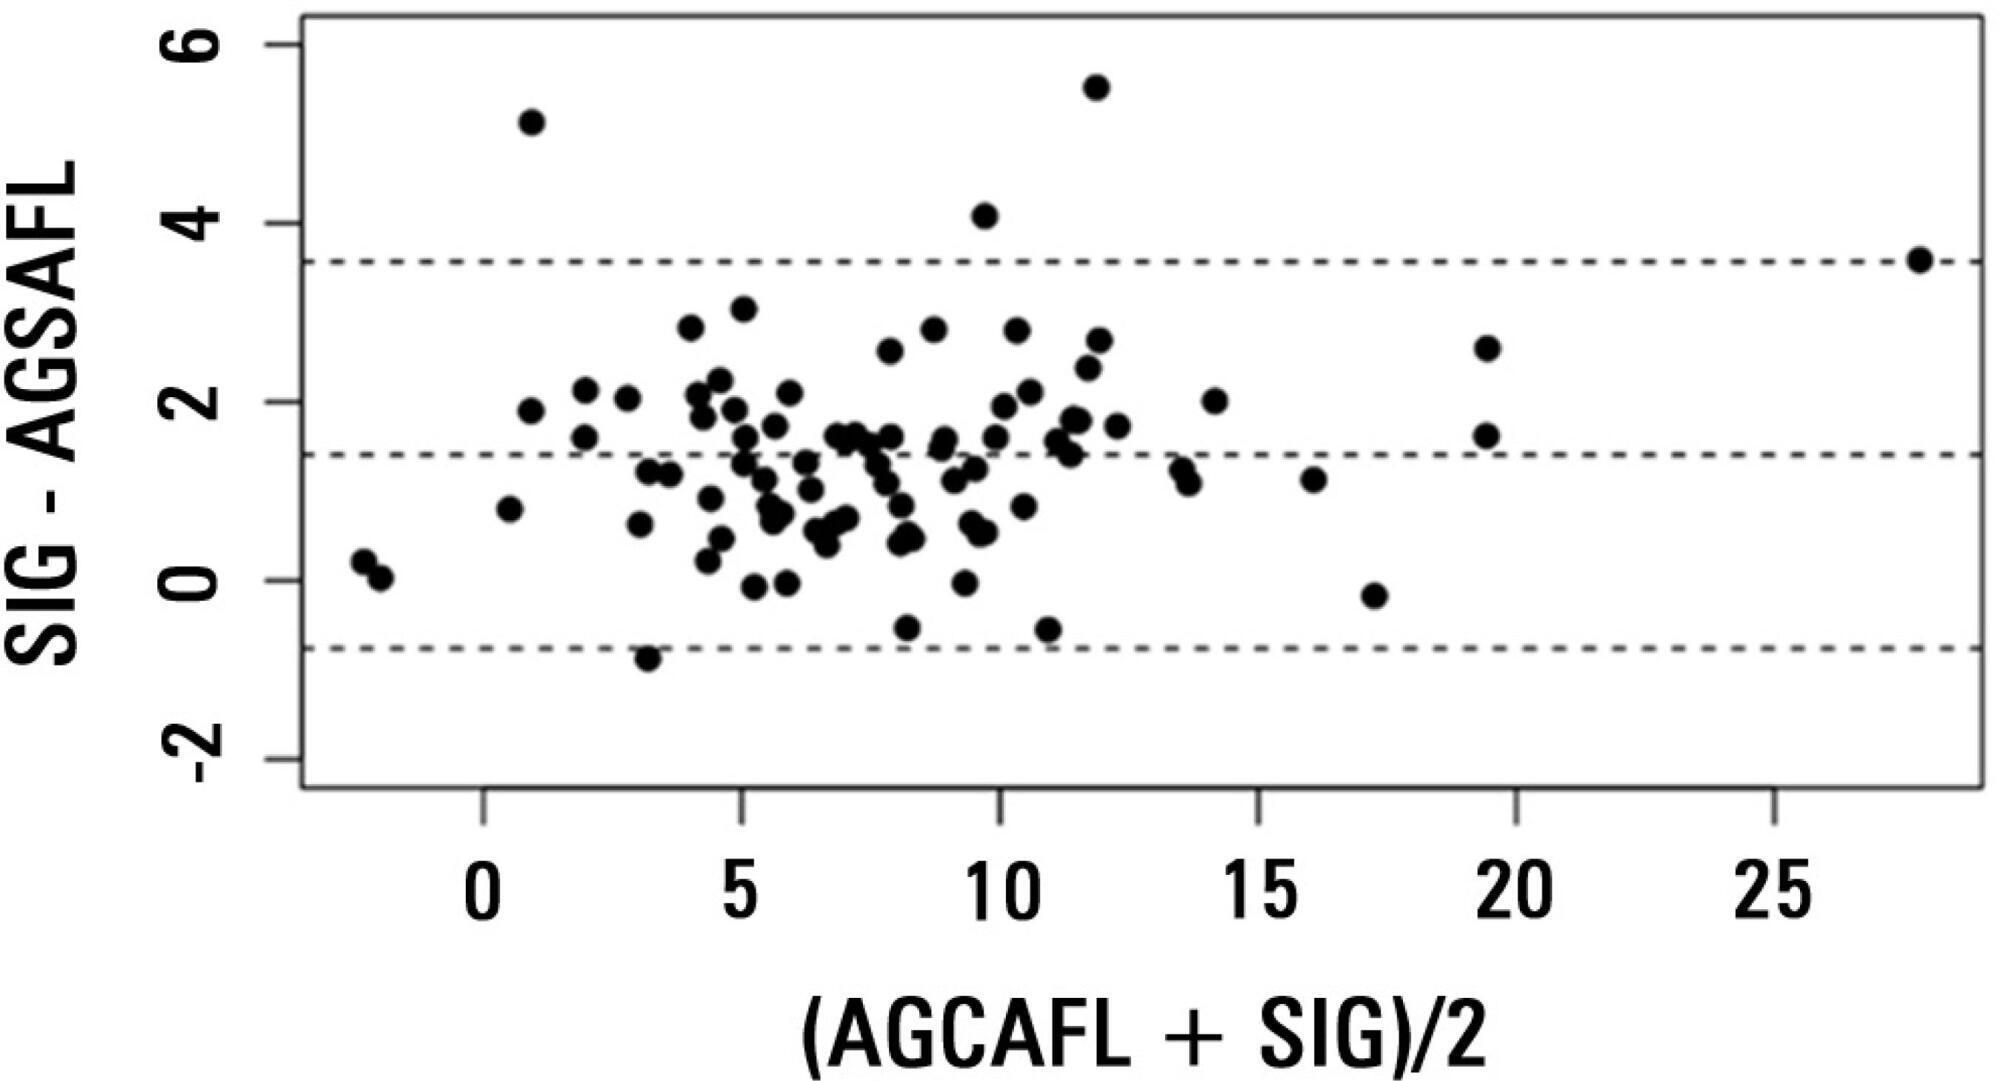 Anion gap corrected for albumin, phosphate and lactate is a
               good predictor of strong ion gap in critically ill patients: a nested cohort
               study